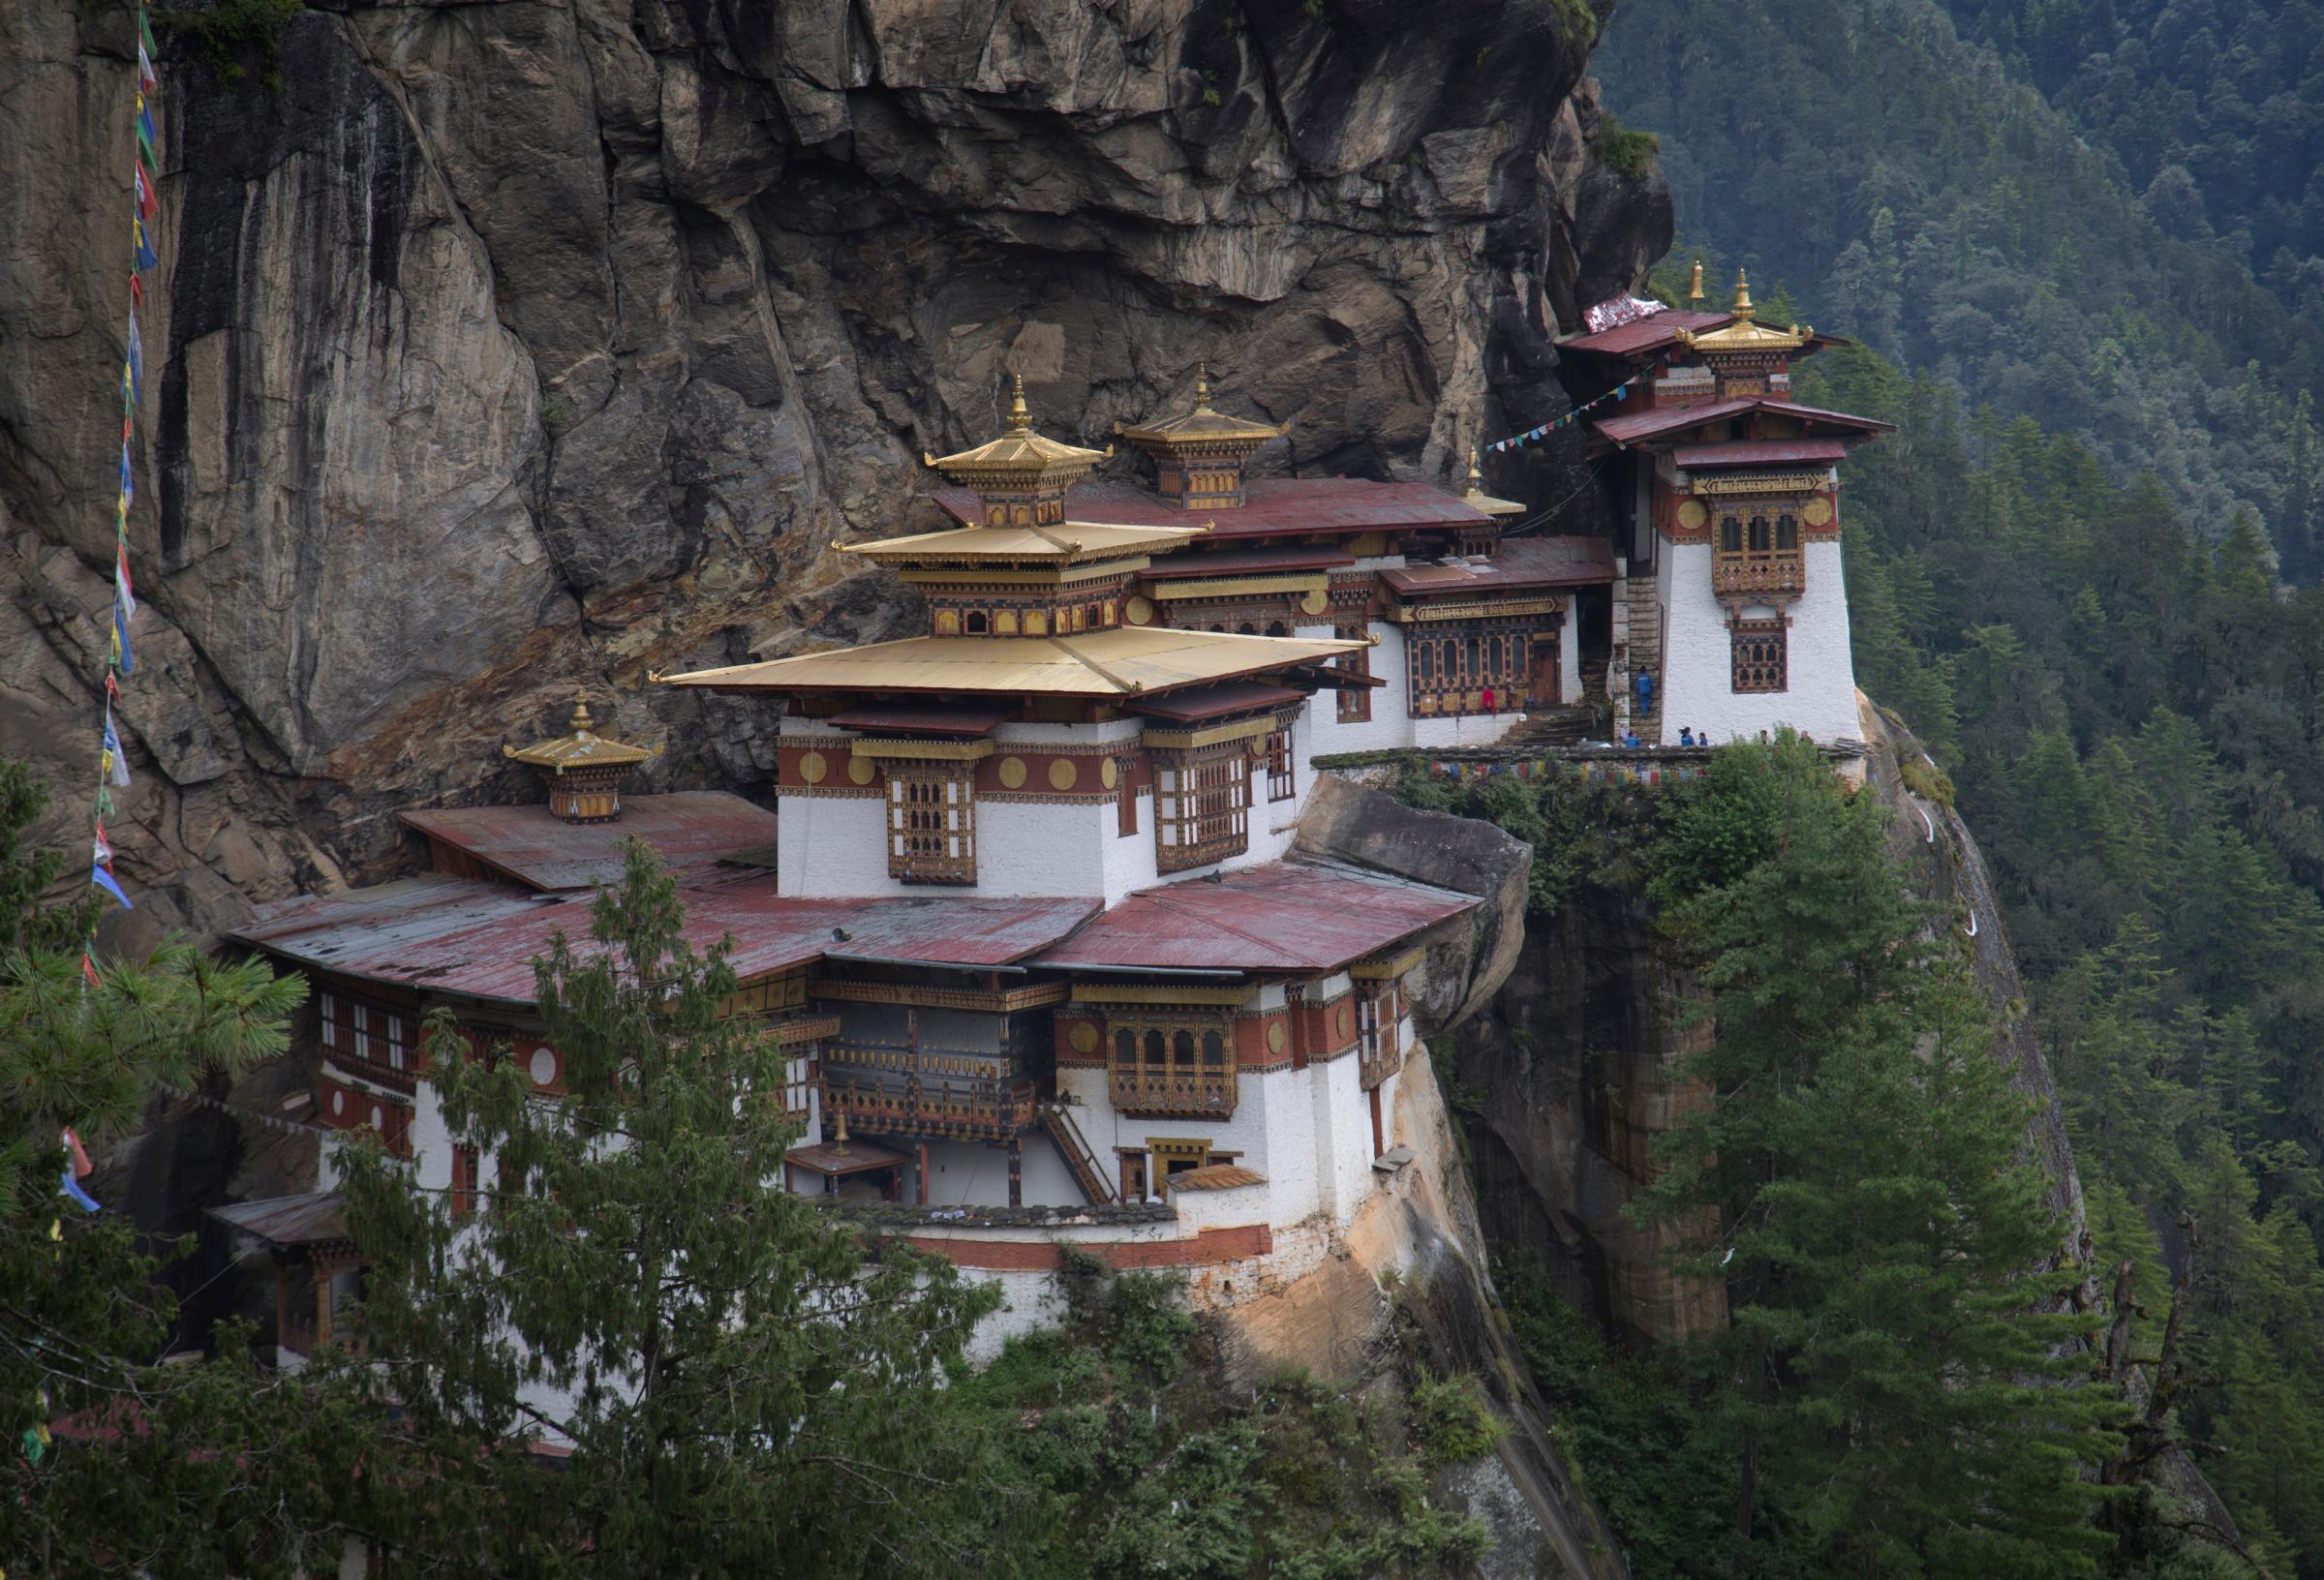 Paro, Bhutan - September 7, 2013 : Taktsang Palphug Monastery, or The Tiger's Nest Temple, near Paro, Bhutan on September 7, 2013. Bhutan, a Buddhist kingdom which allows only a limited number of travelers since it opened to foreigners in 1974 in order to preserve its fragile environment and culture, has become an increasingly popular destination for international tourists.  (Photo by Kuni Takahashi/Getty Images)